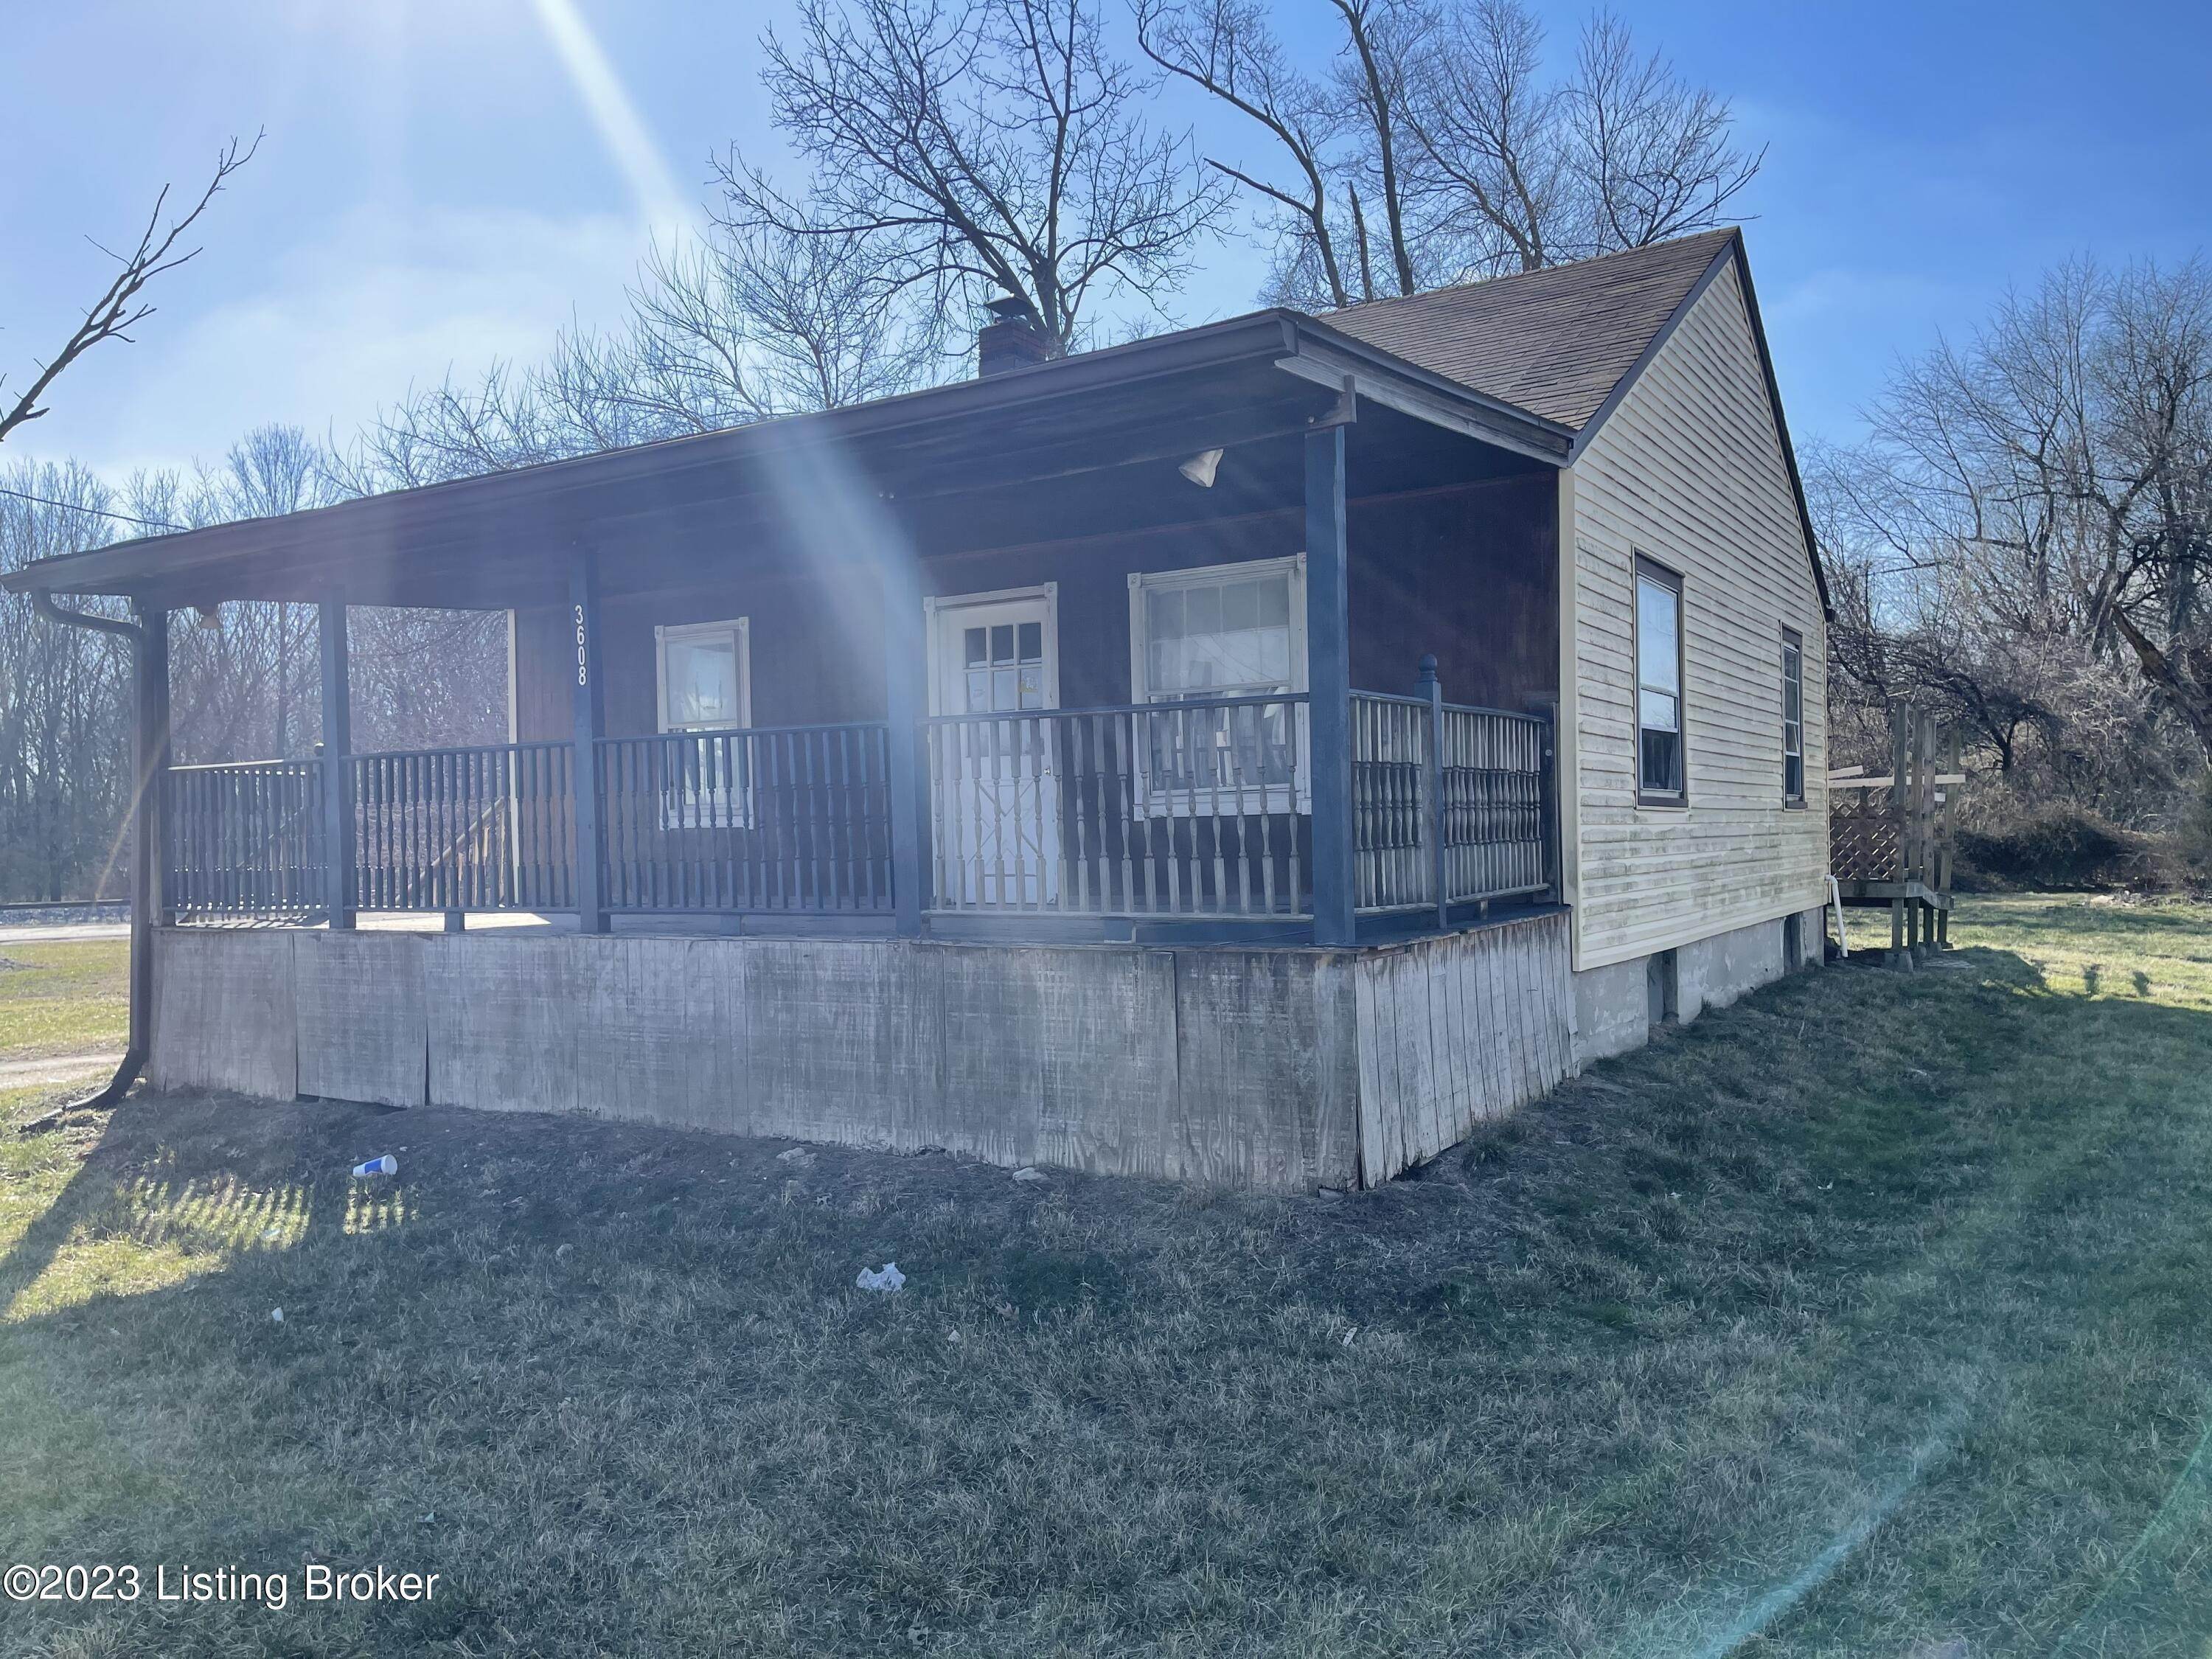 Single Family at Louisville, KY 40211